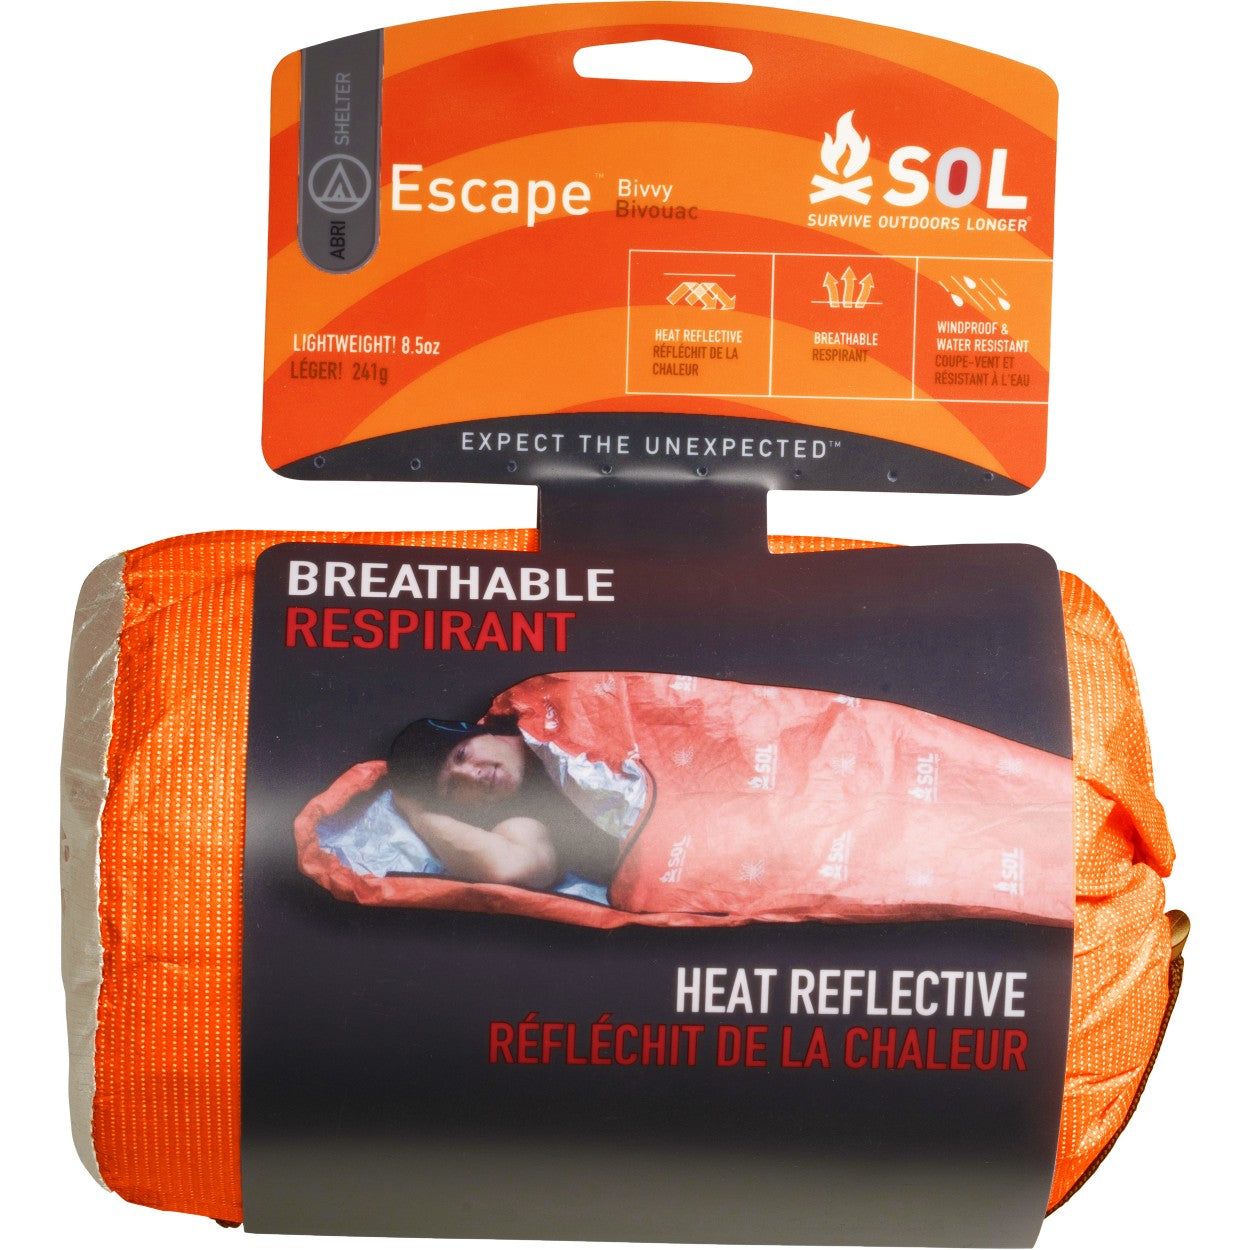 Sol Escape Bivvy - Survival Orange -  - Mansfield Hunting & Fishing - Products to prepare for Corona Virus